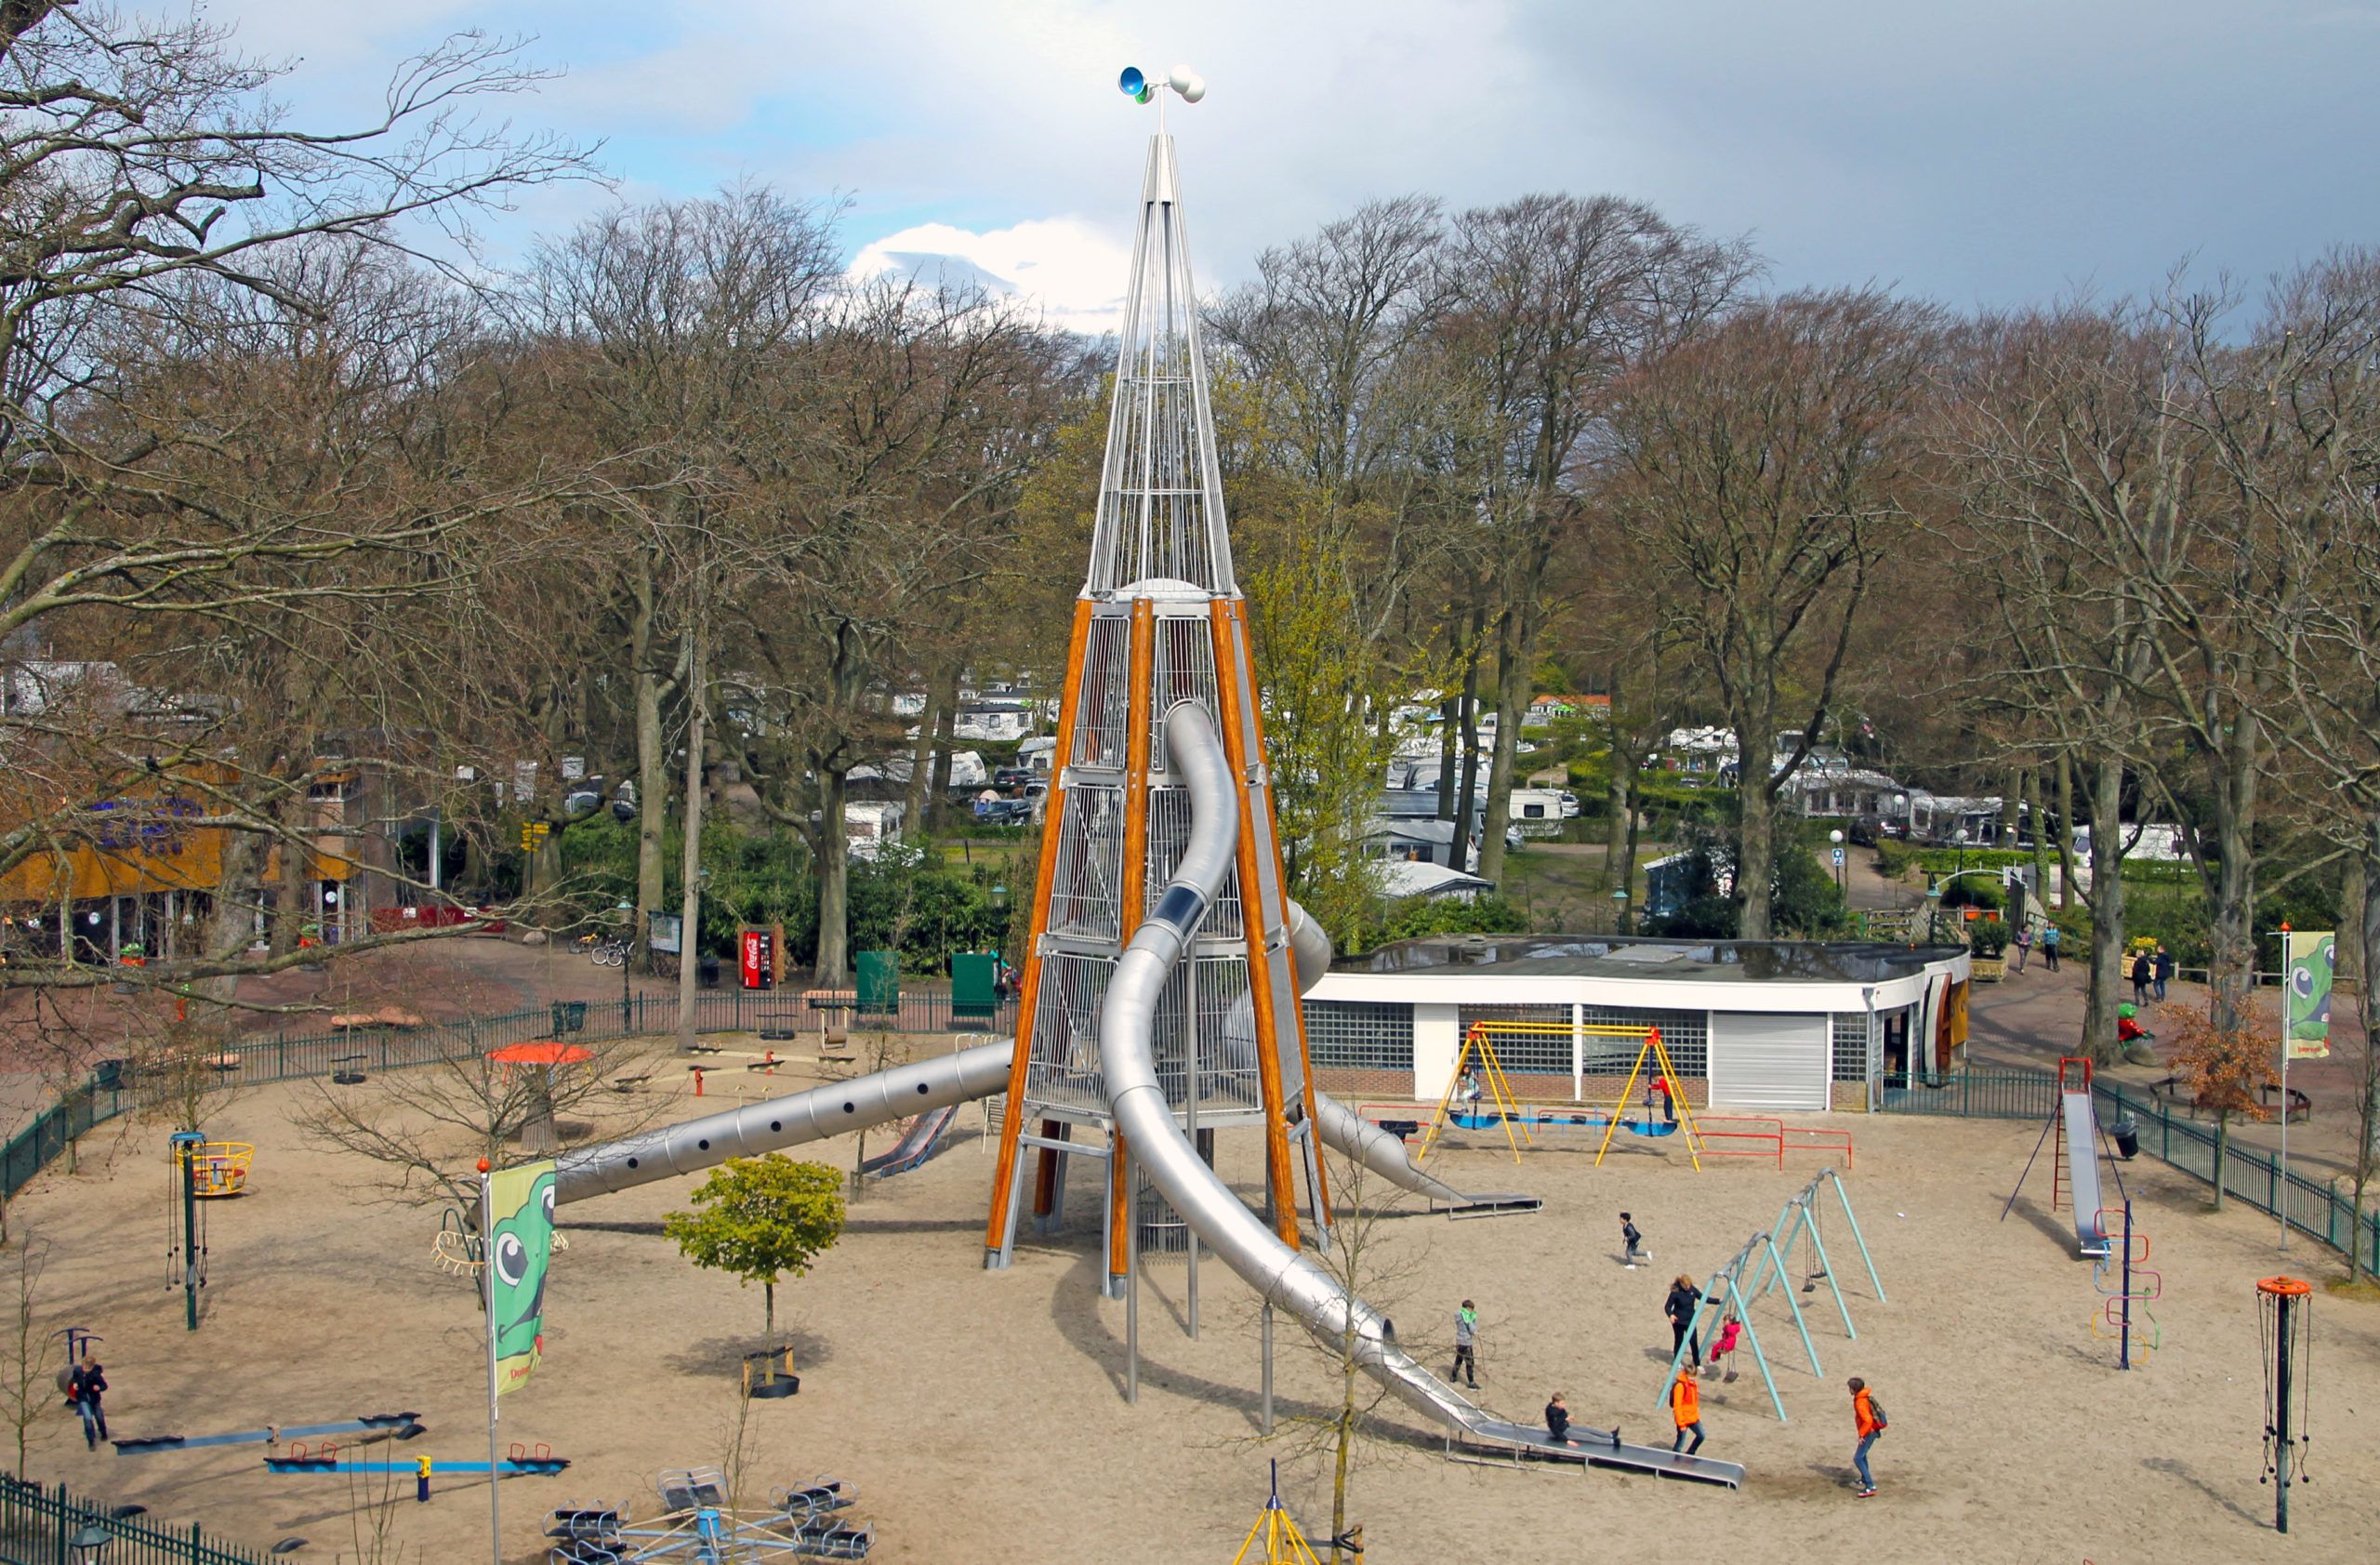 tall playground tower with slides